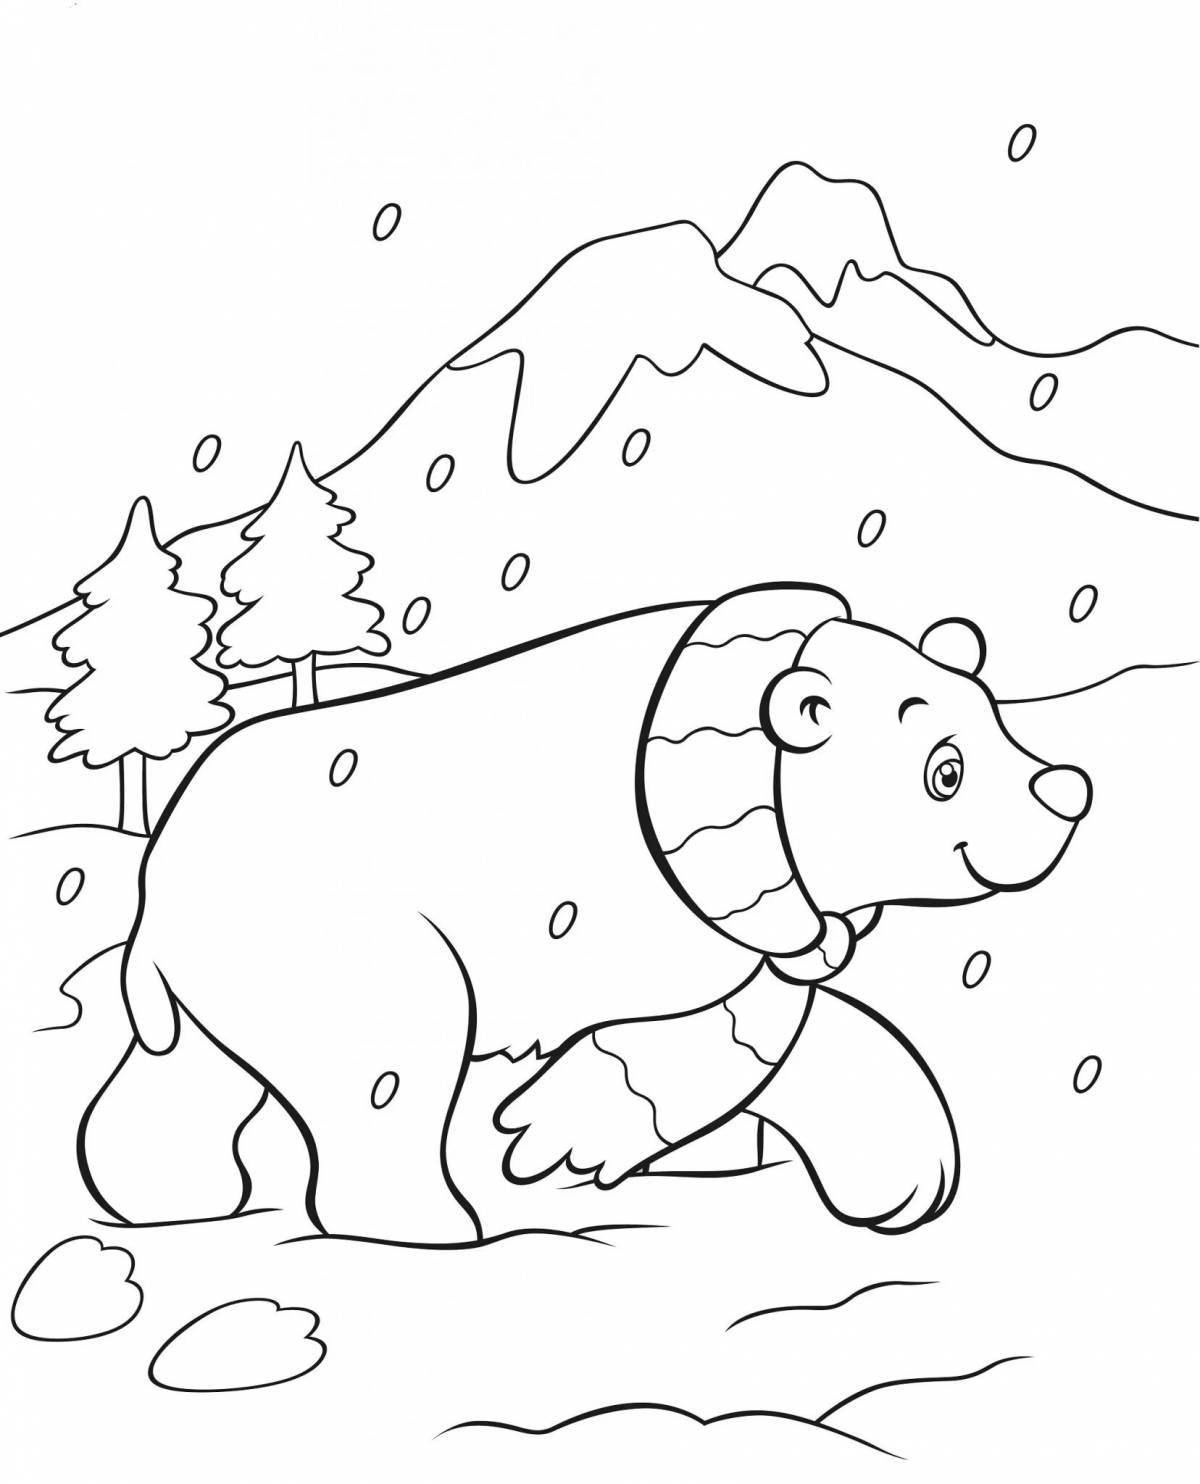 Elegant coloring for children 4-5 years old animals of the north